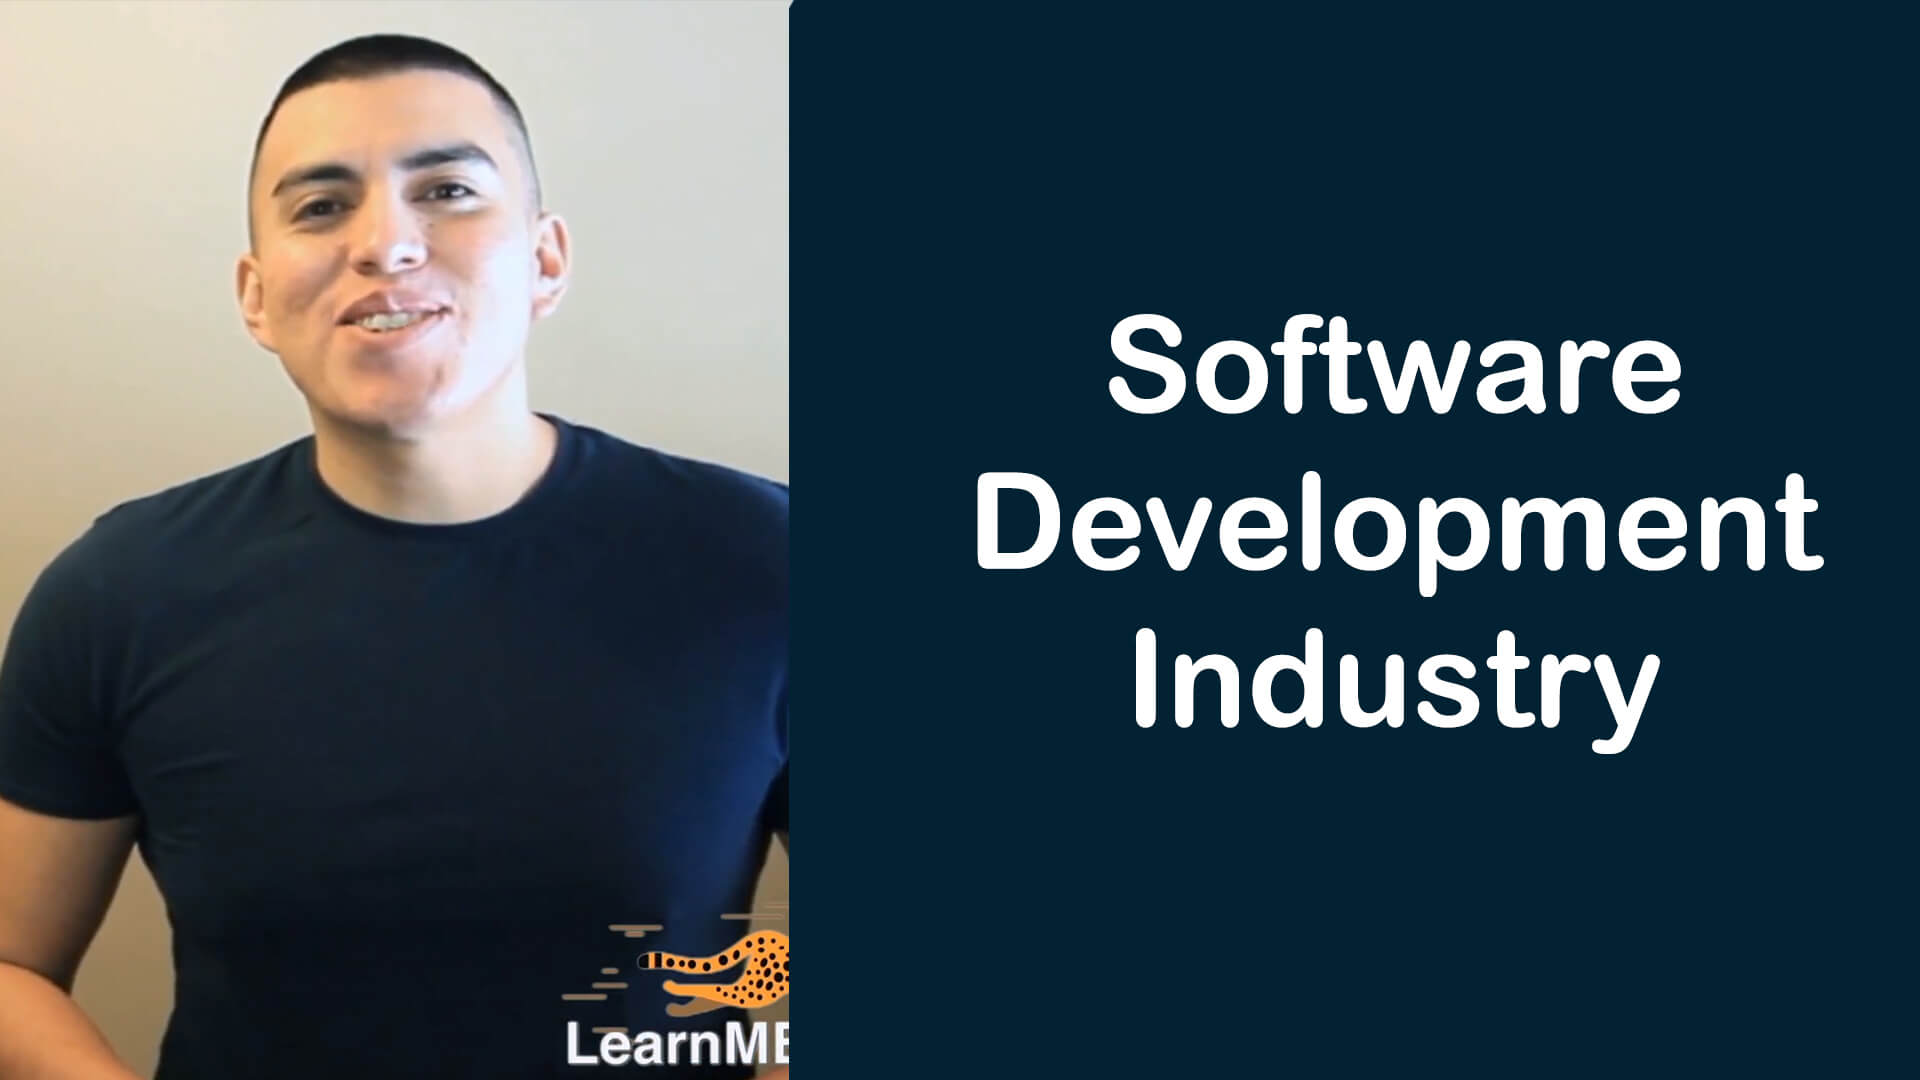 Introduction to the Software Development Industry